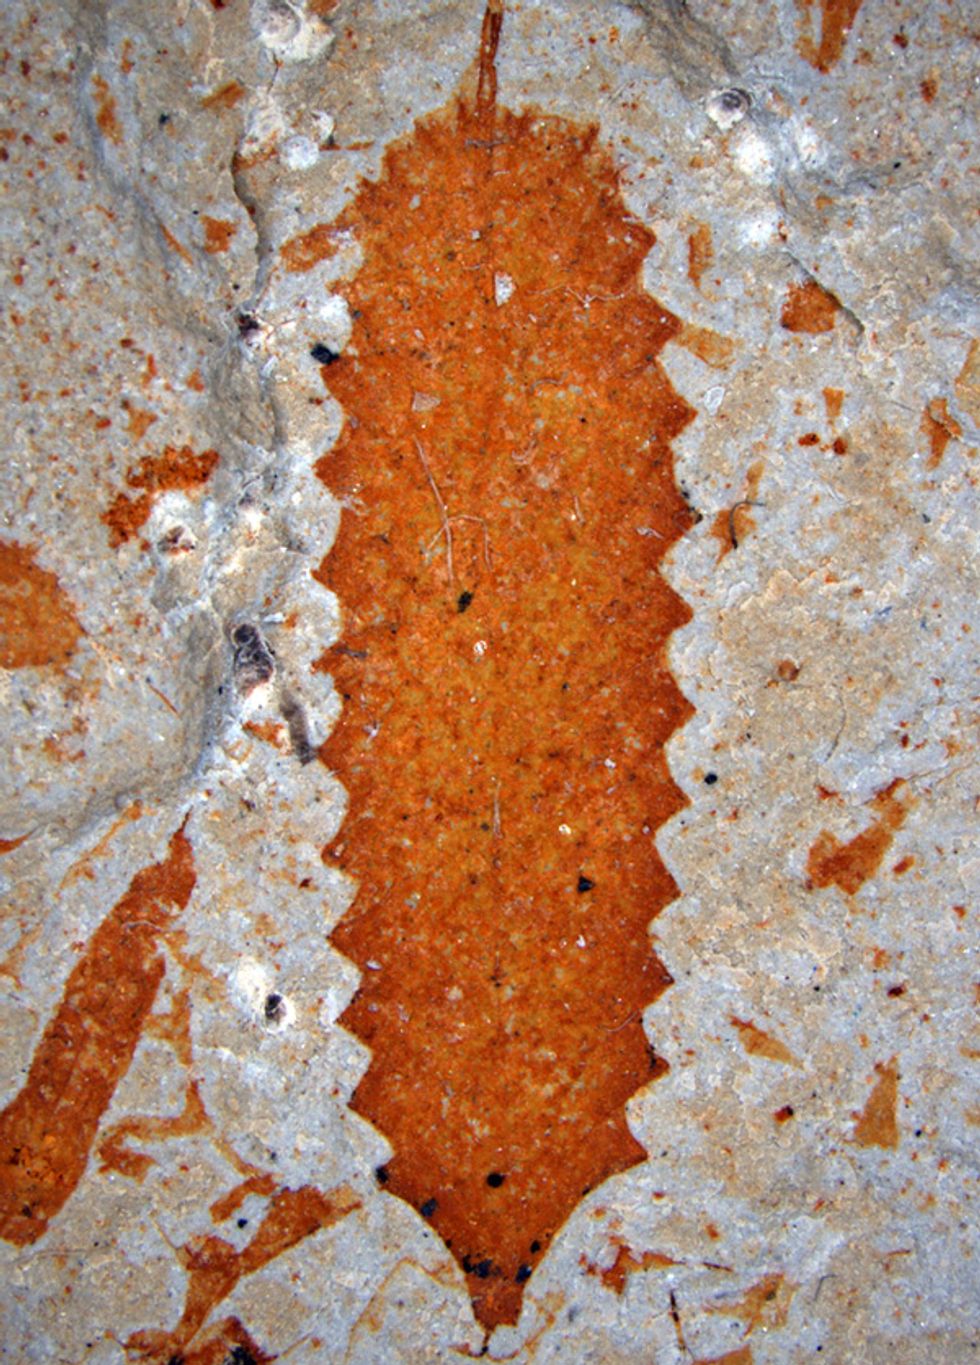 Photo of a fossilized leaf.  